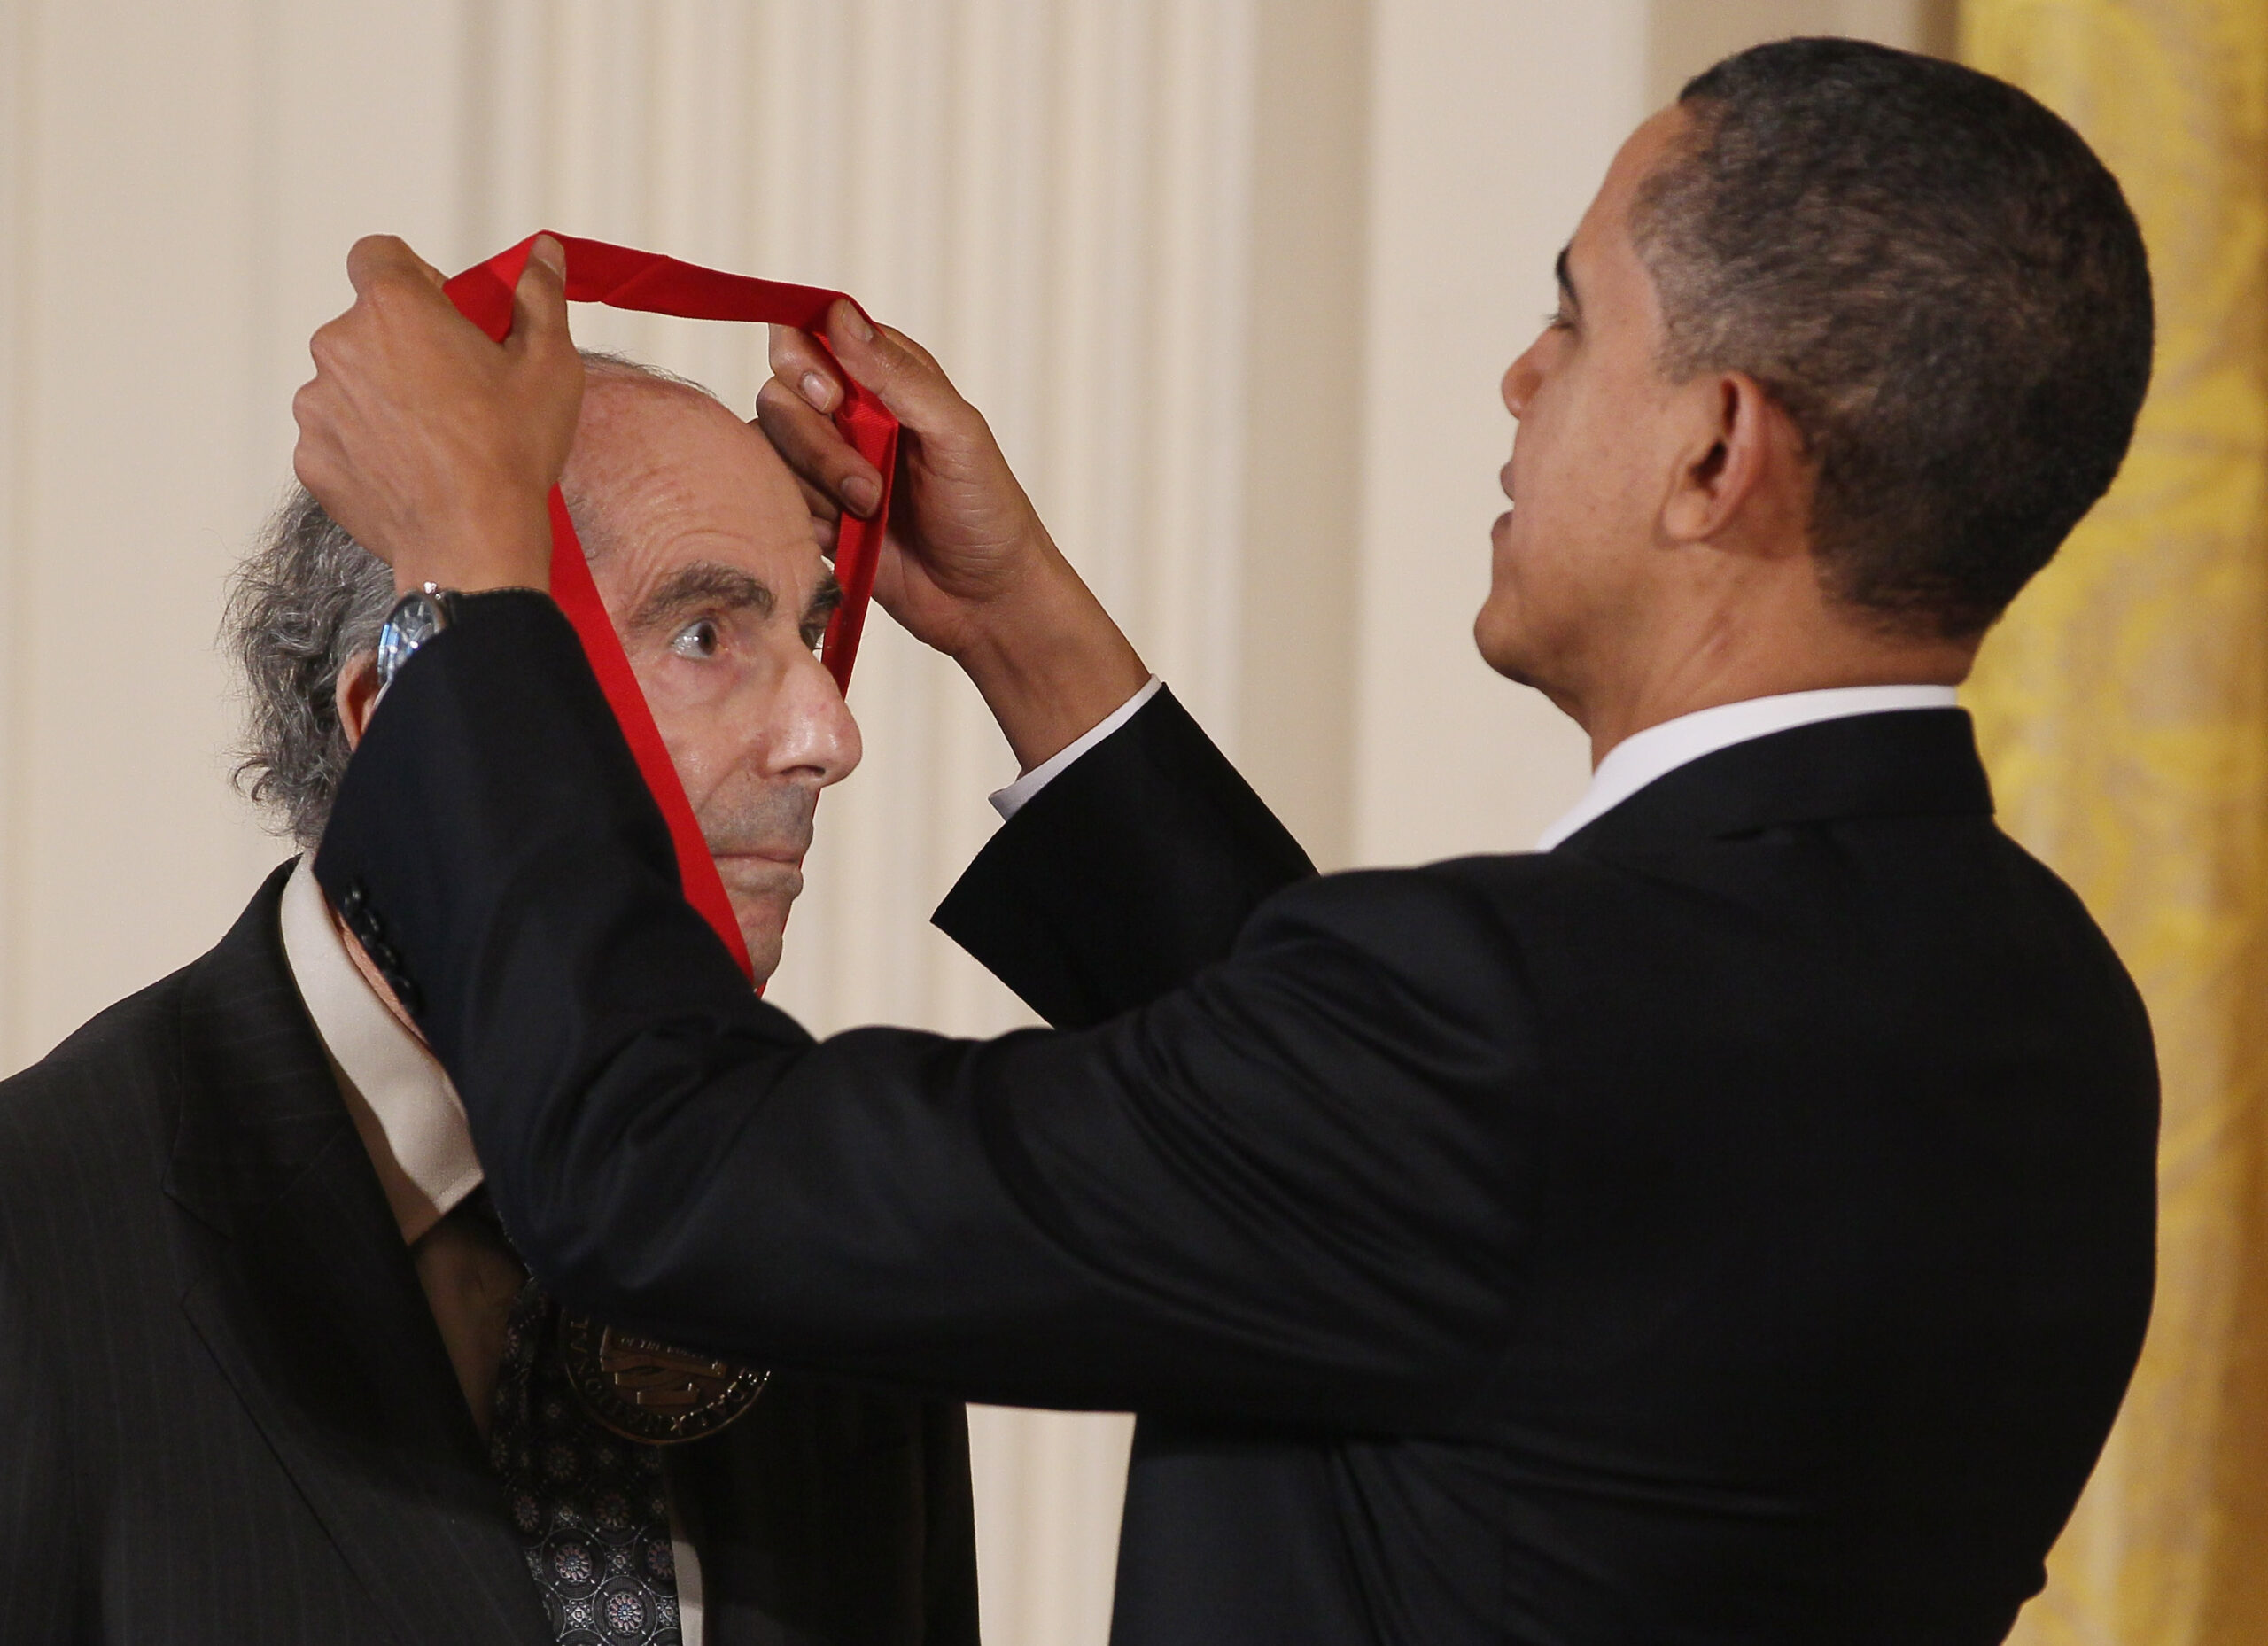 Former President Barack Obama presents the 2010 National Humanities Medal to novelist Philip Roth, Washington, D.C., March 2, 2011 (Mark Wilson/Getty Images)